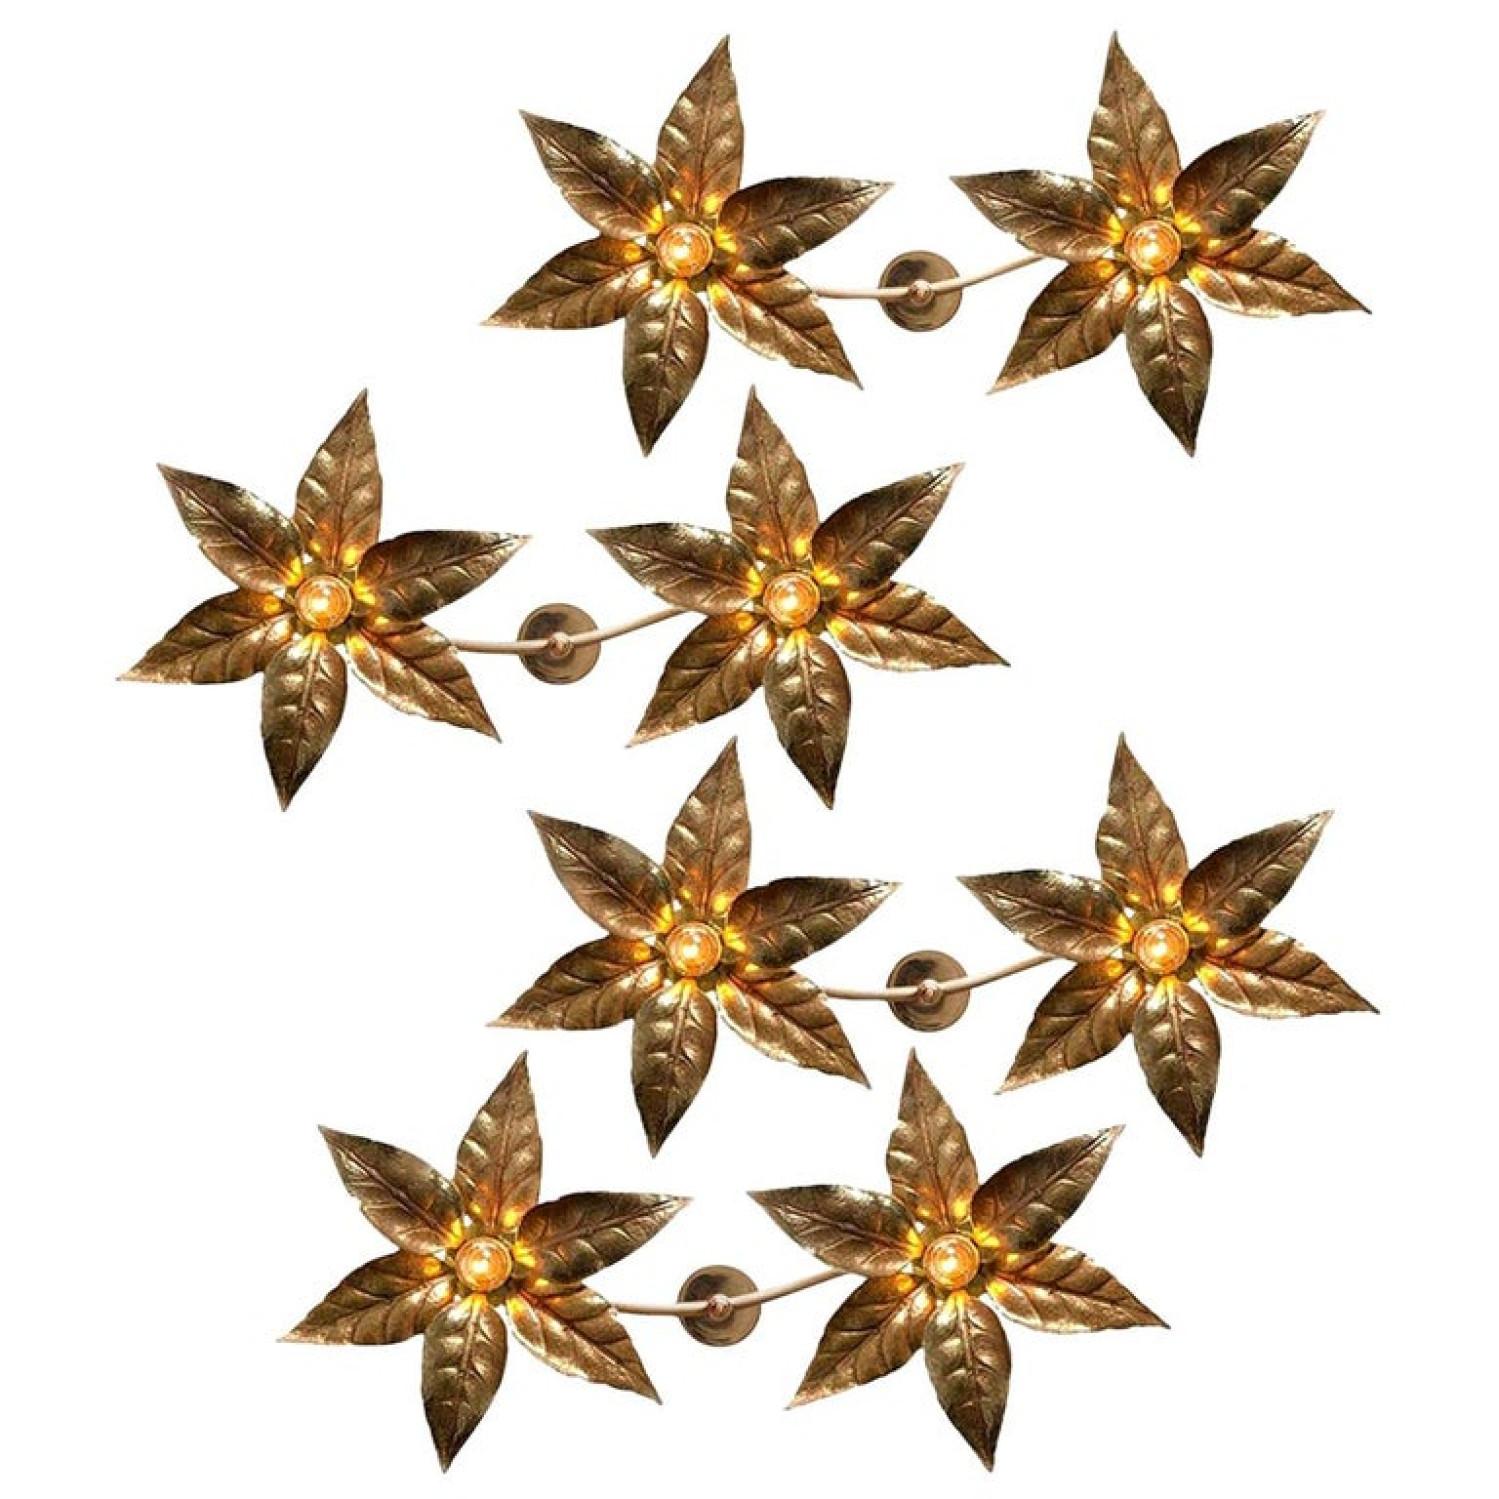 One of the four brass flowers wall sculptures in the style of designer Willy Daro manufactured by 'Massive Lighting', circa 1970s, Belgian. This decorative and beautiful large sculptural light consists of a pair of brass-plated flowers on a bar and